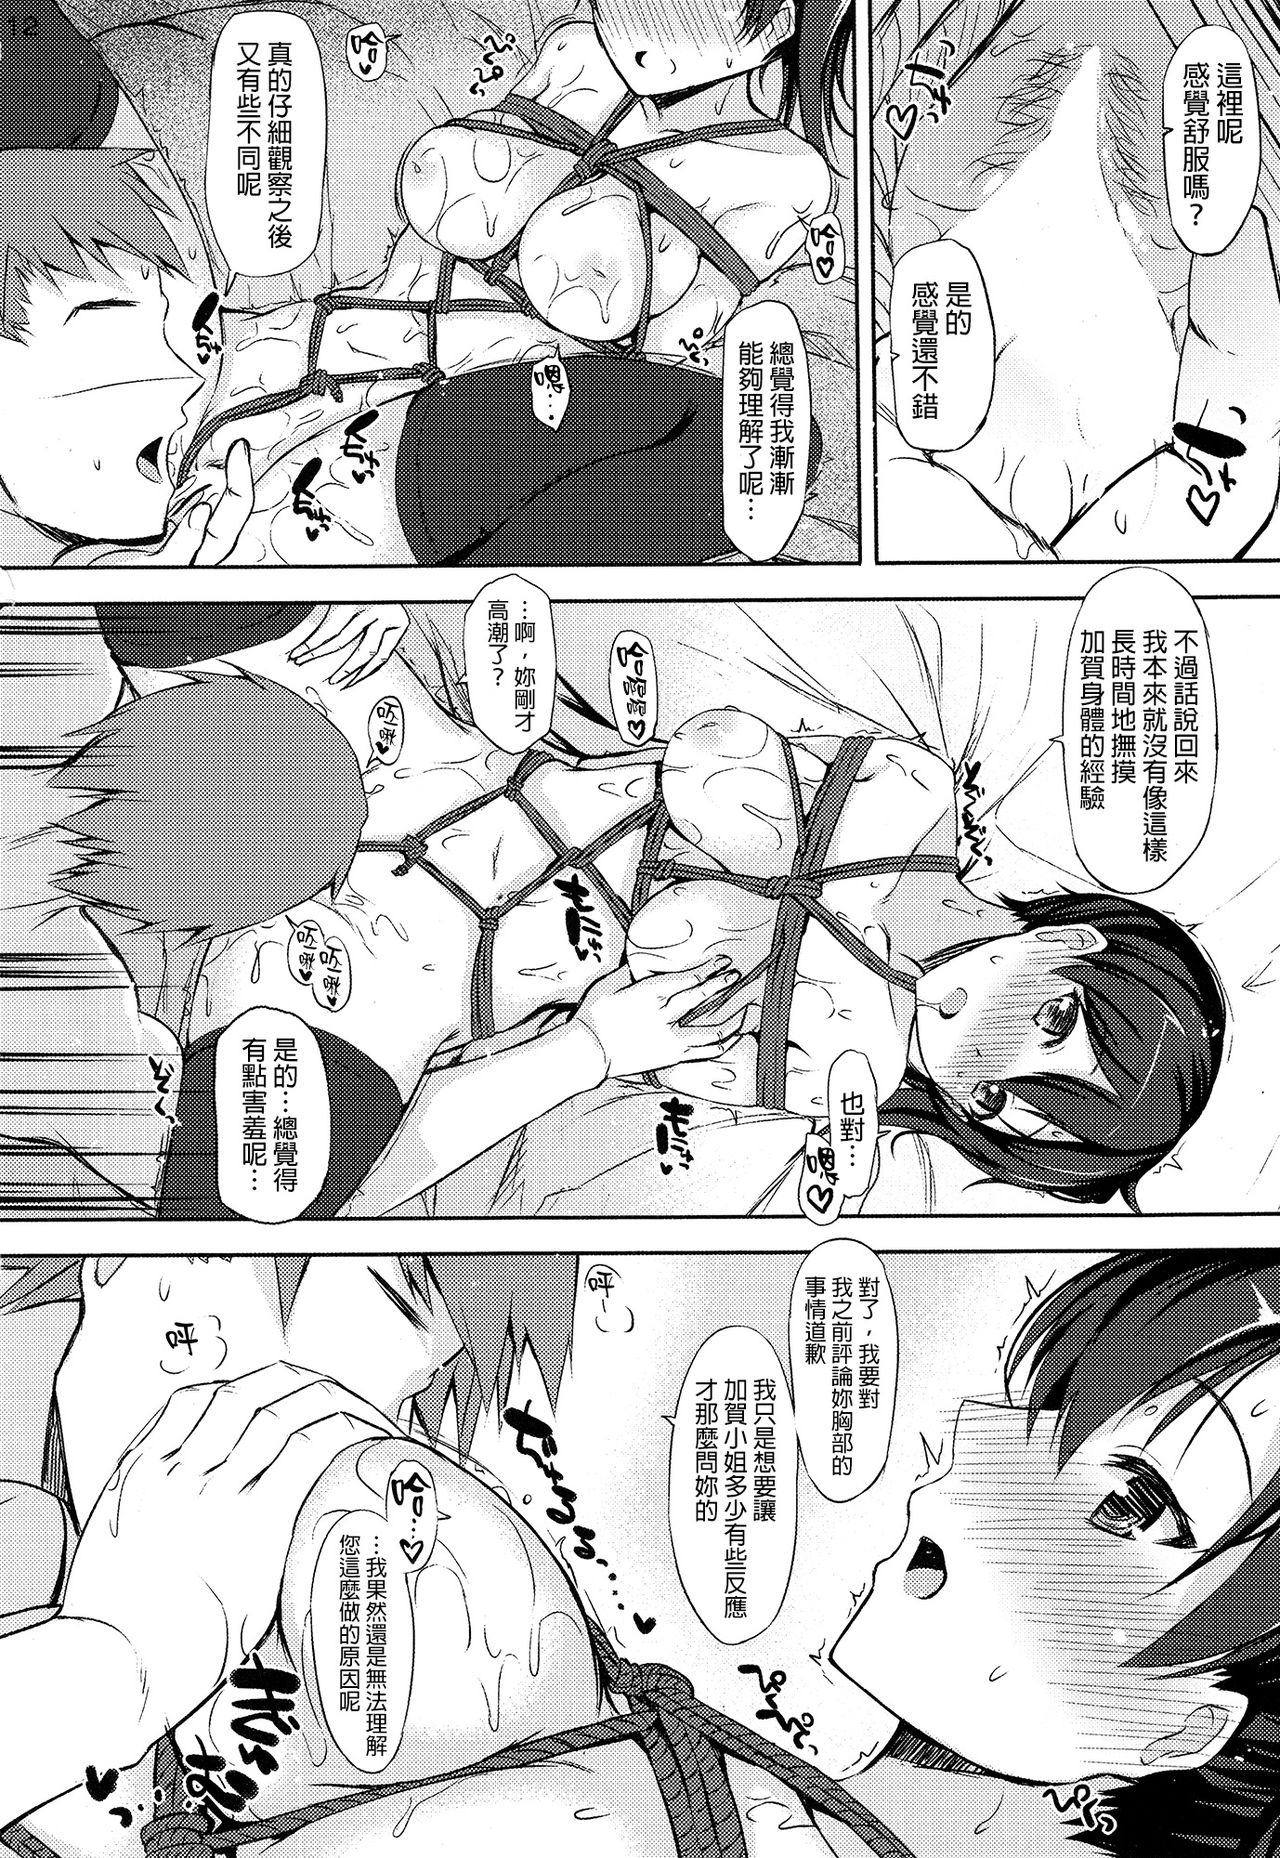 (COMIC1☆8) [INST (Interstellar)] YOU AND ME  (Kantai Collection -KanColle-) [Chinese] [final個人漢化] (COMIC1☆8) [INST (Interstellar)] YOU AND ME (艦隊これくしょん-艦これ-) [中文翻譯]